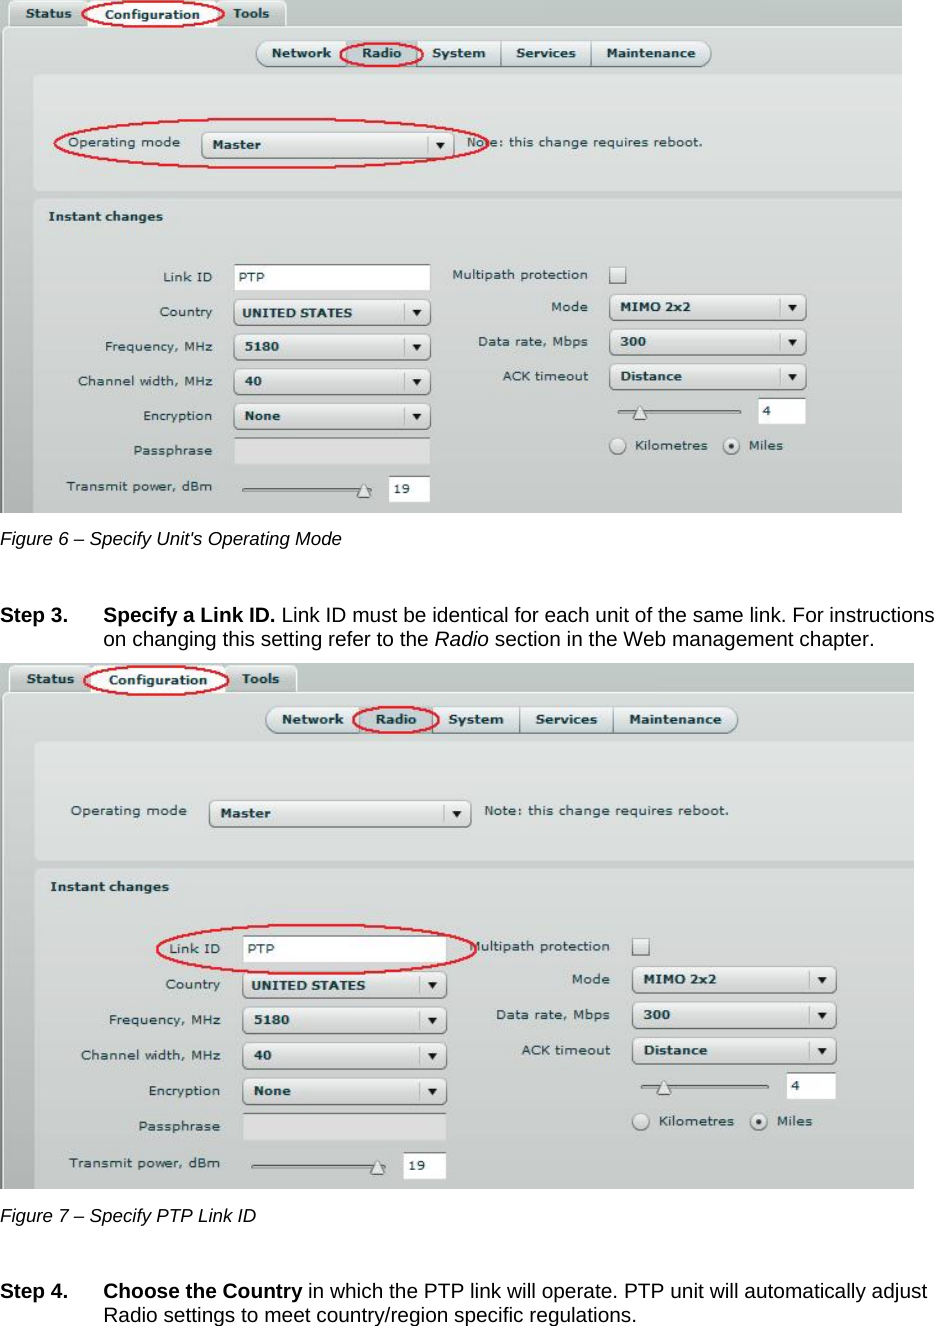  LigoWave Page 12  Figure 6 – Specify Unit&apos;s Operating Mode  Step 3.   Specify a Link ID. Link ID must be identical for each unit of the same link. For instructions on changing this setting refer to the Radio section in the Web management chapter.  Figure 7 – Specify PTP Link ID  Step 4. Choose the Country in which the PTP link will operate. PTP unit will automatically adjust Radio settings to meet country/region specific regulations. 